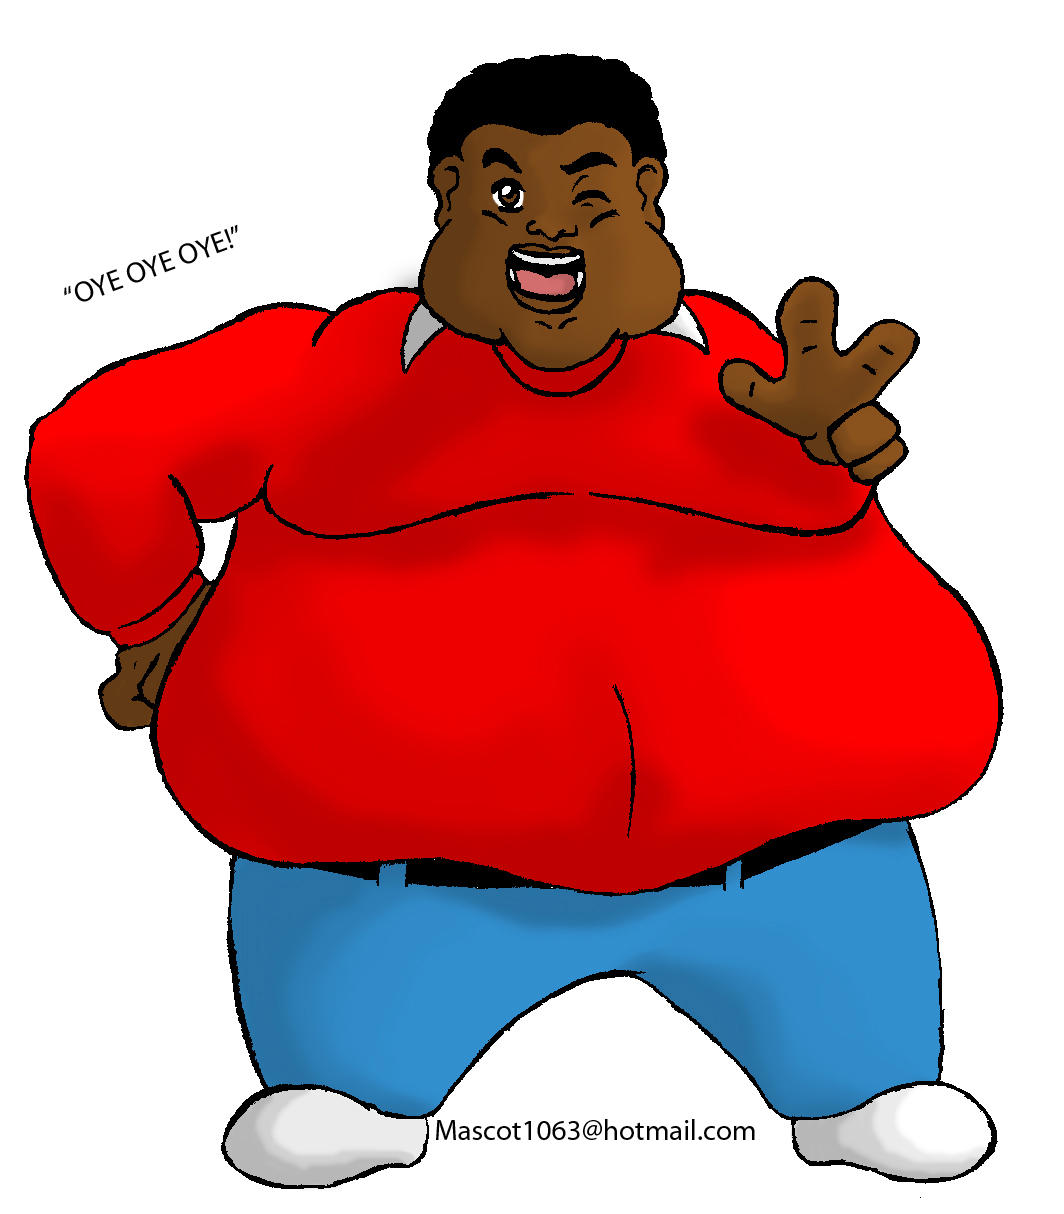 fat_albert___it_had_to_be_done_by_mascot1063.jpg